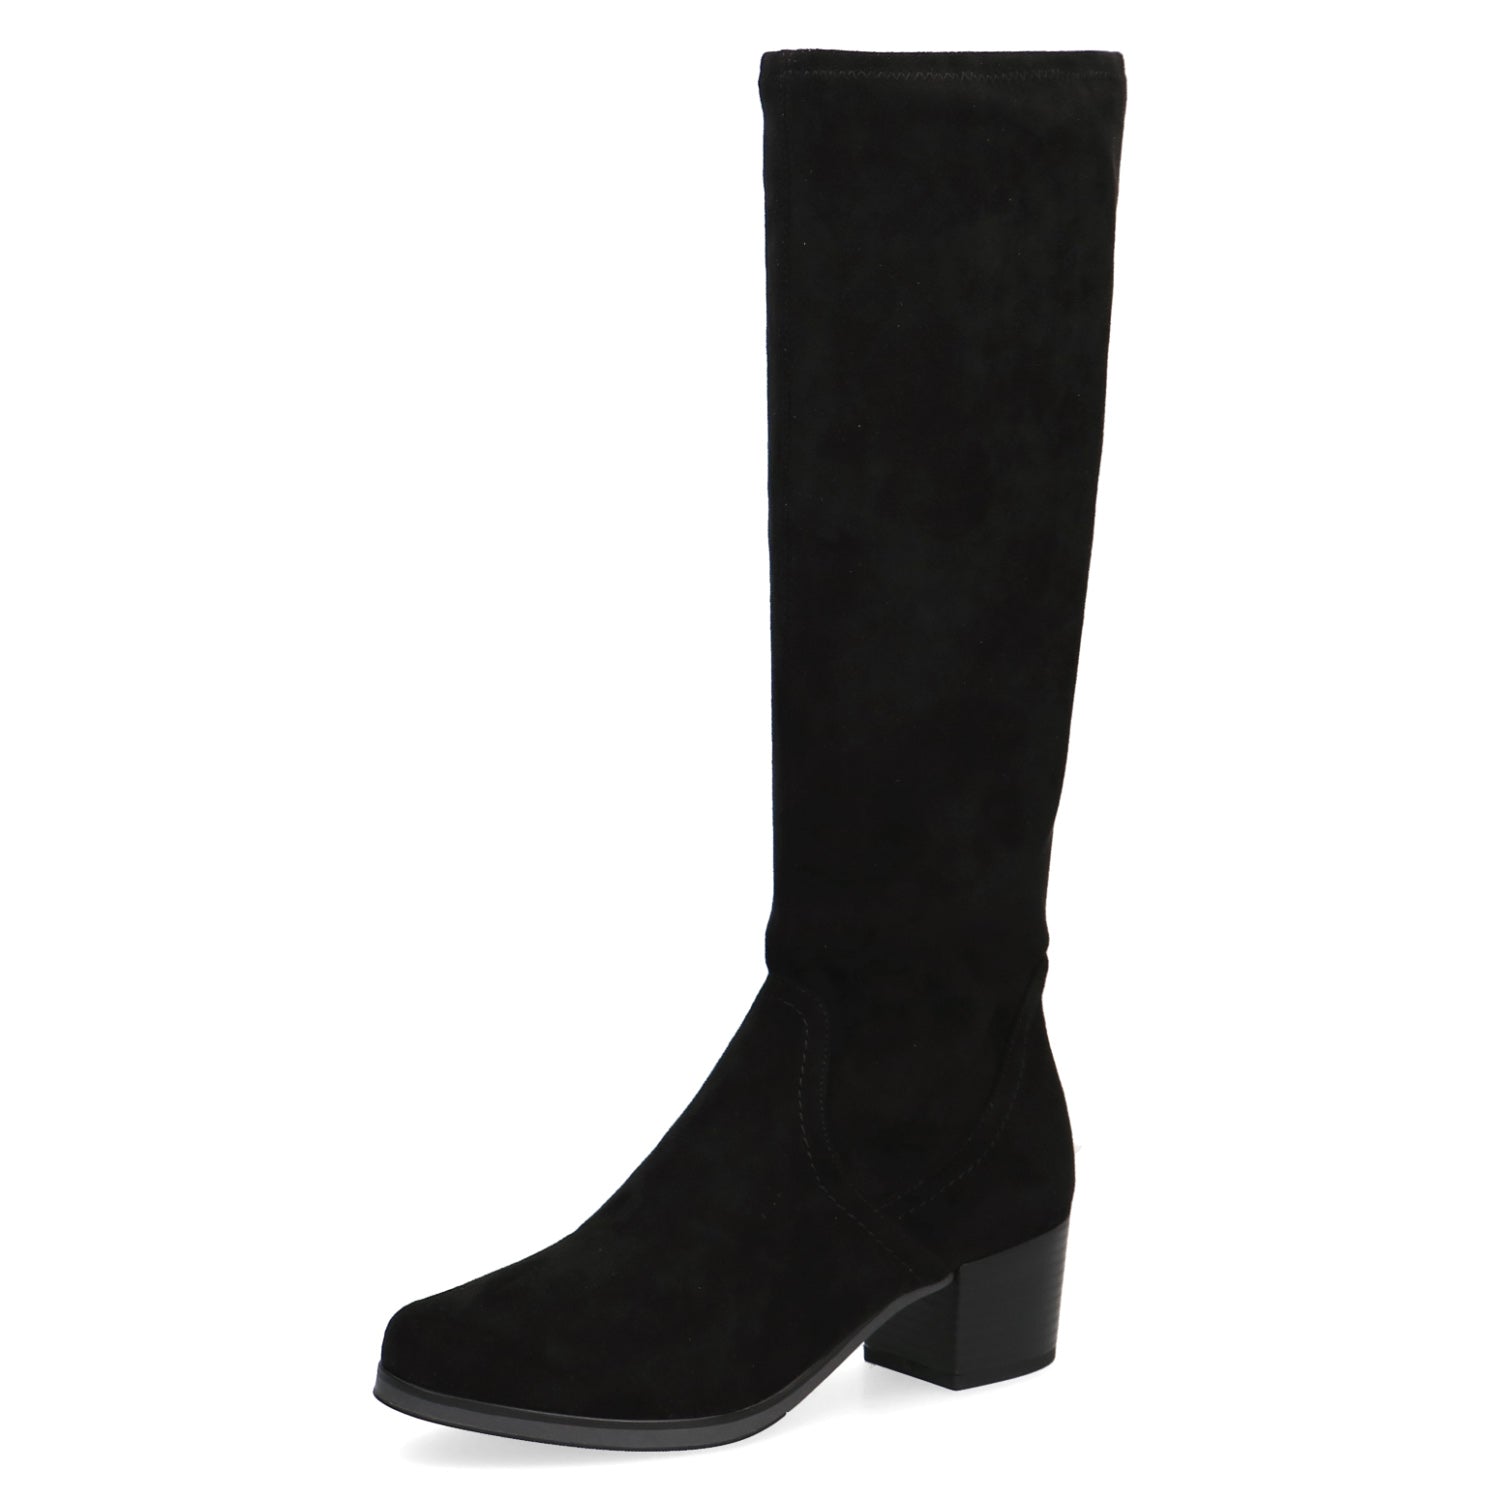 Angled view highlighting the elegant design of the Caprice Knee High Boot.